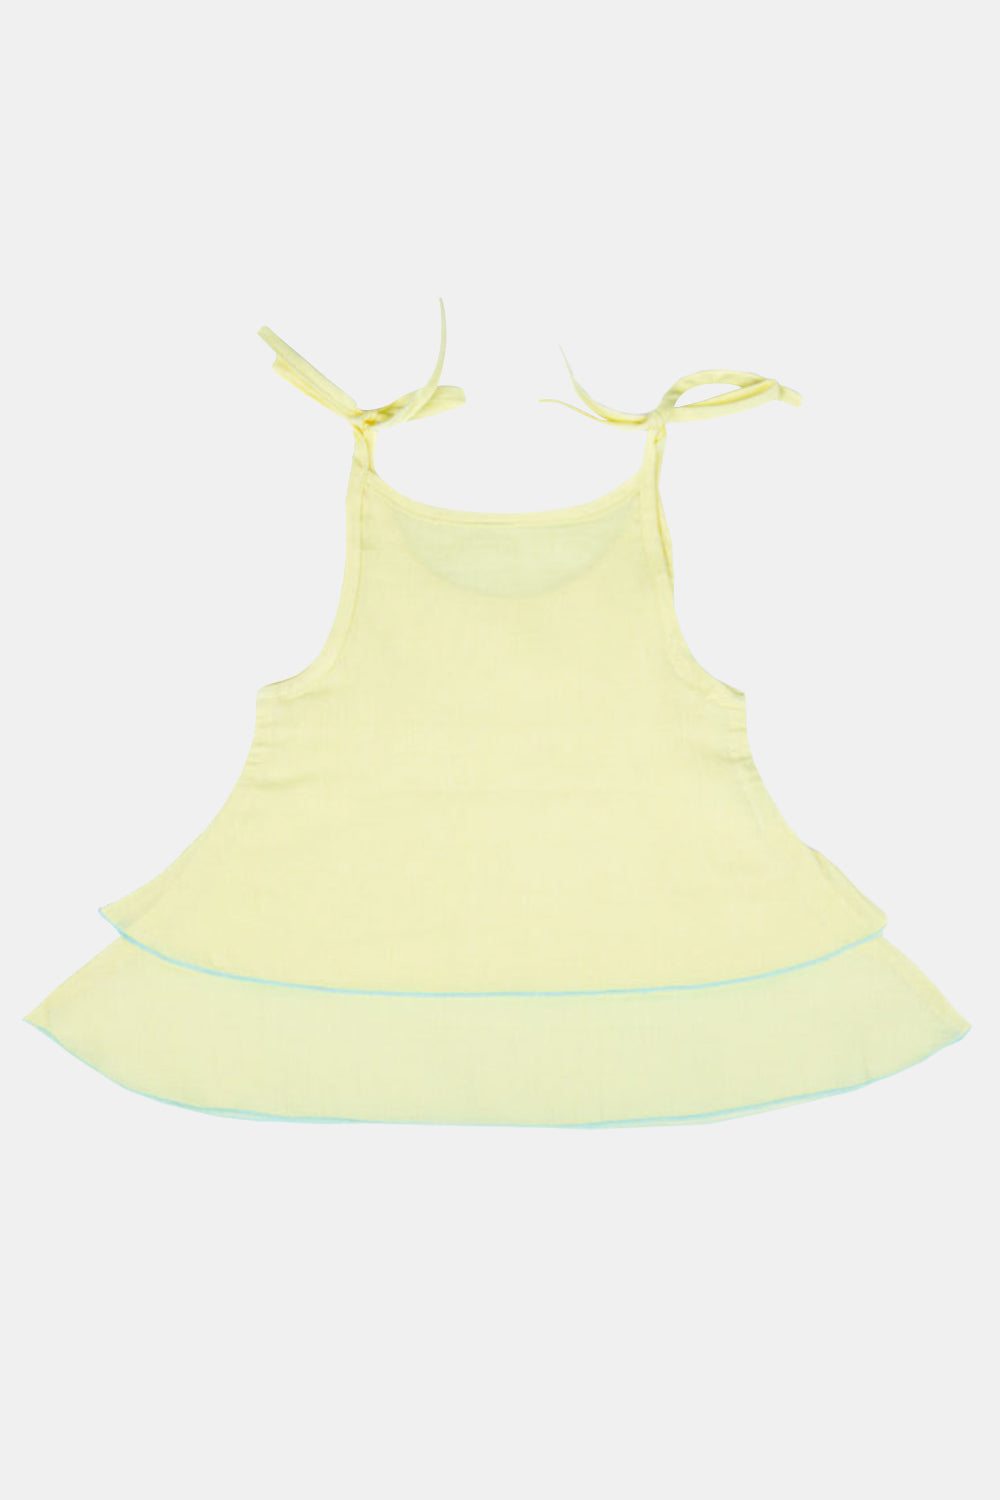 Oh Baby Shoulder Knot Sleeveless Frock - FR03 Size   0m-3m Color Lemon Yellow